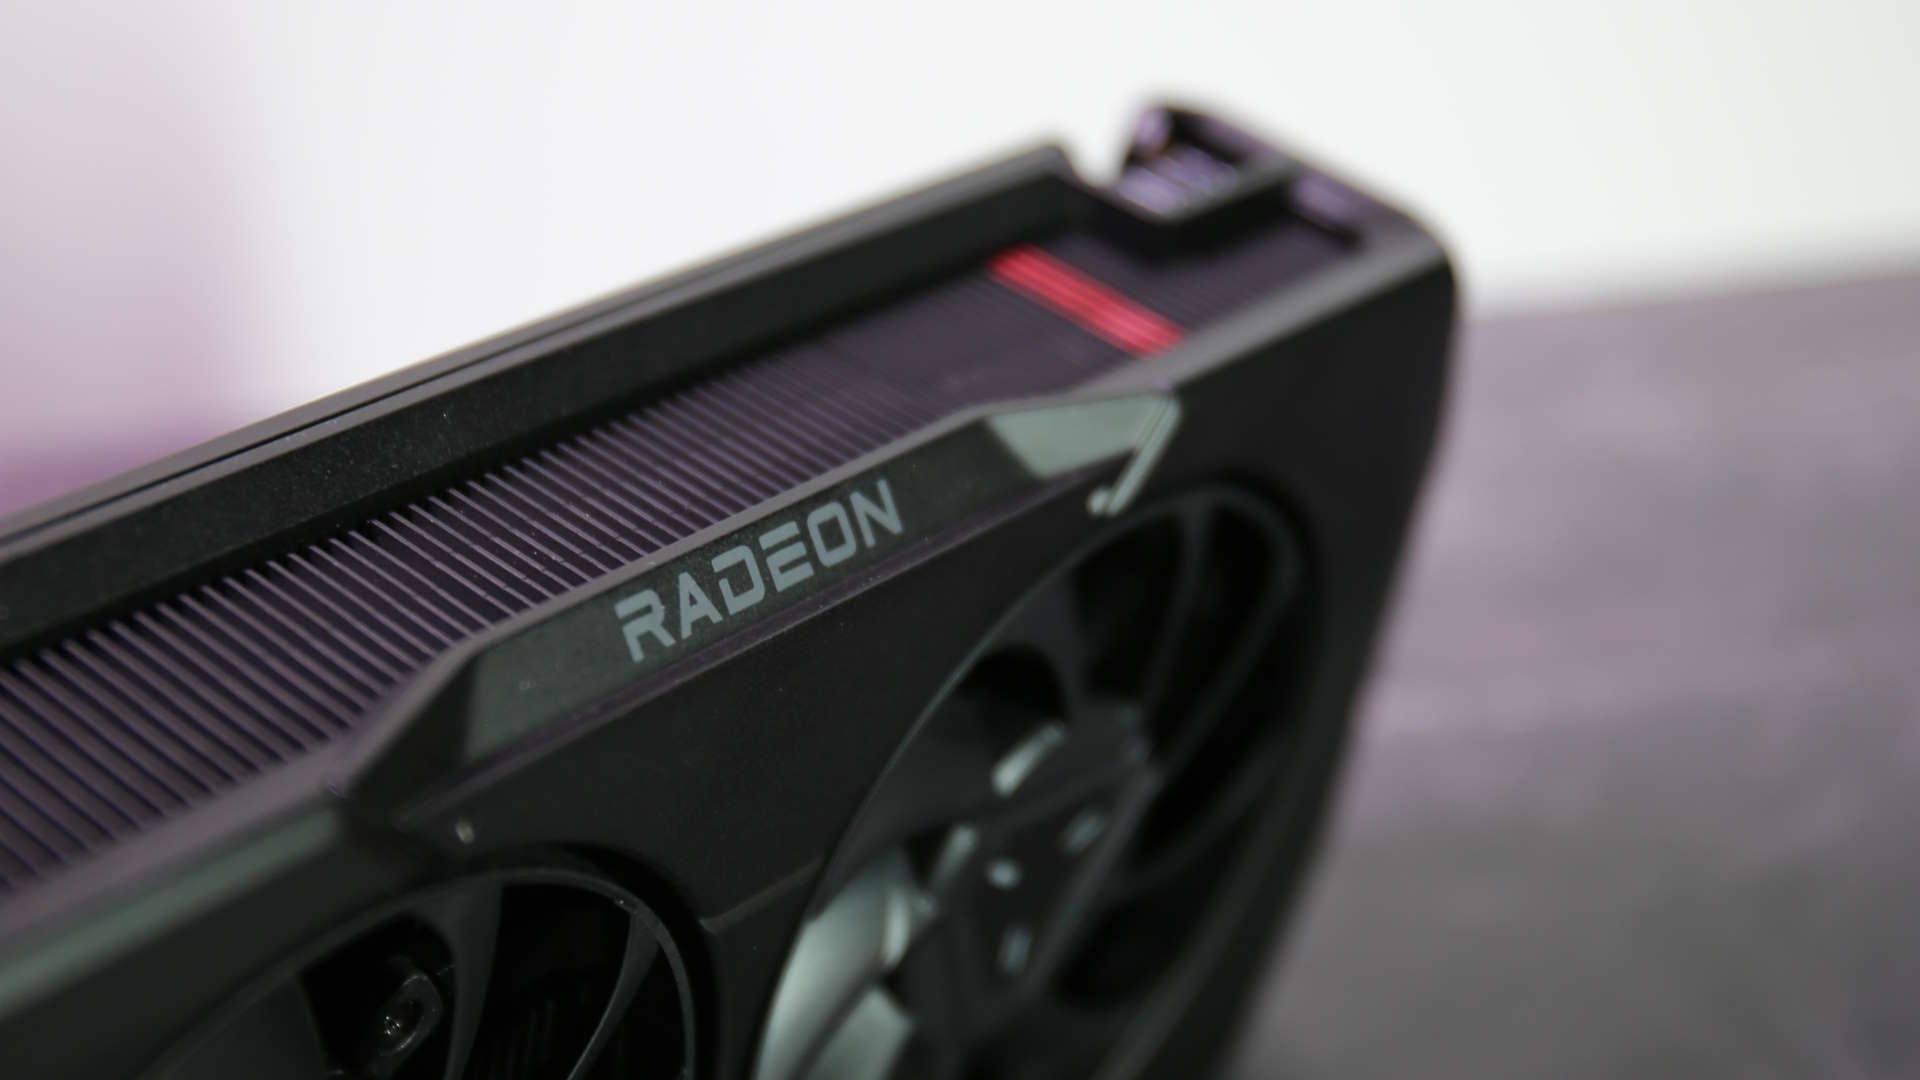 AMD Adds Radeon RX 7600 XT To Product Stack, 1080p Gaming Card